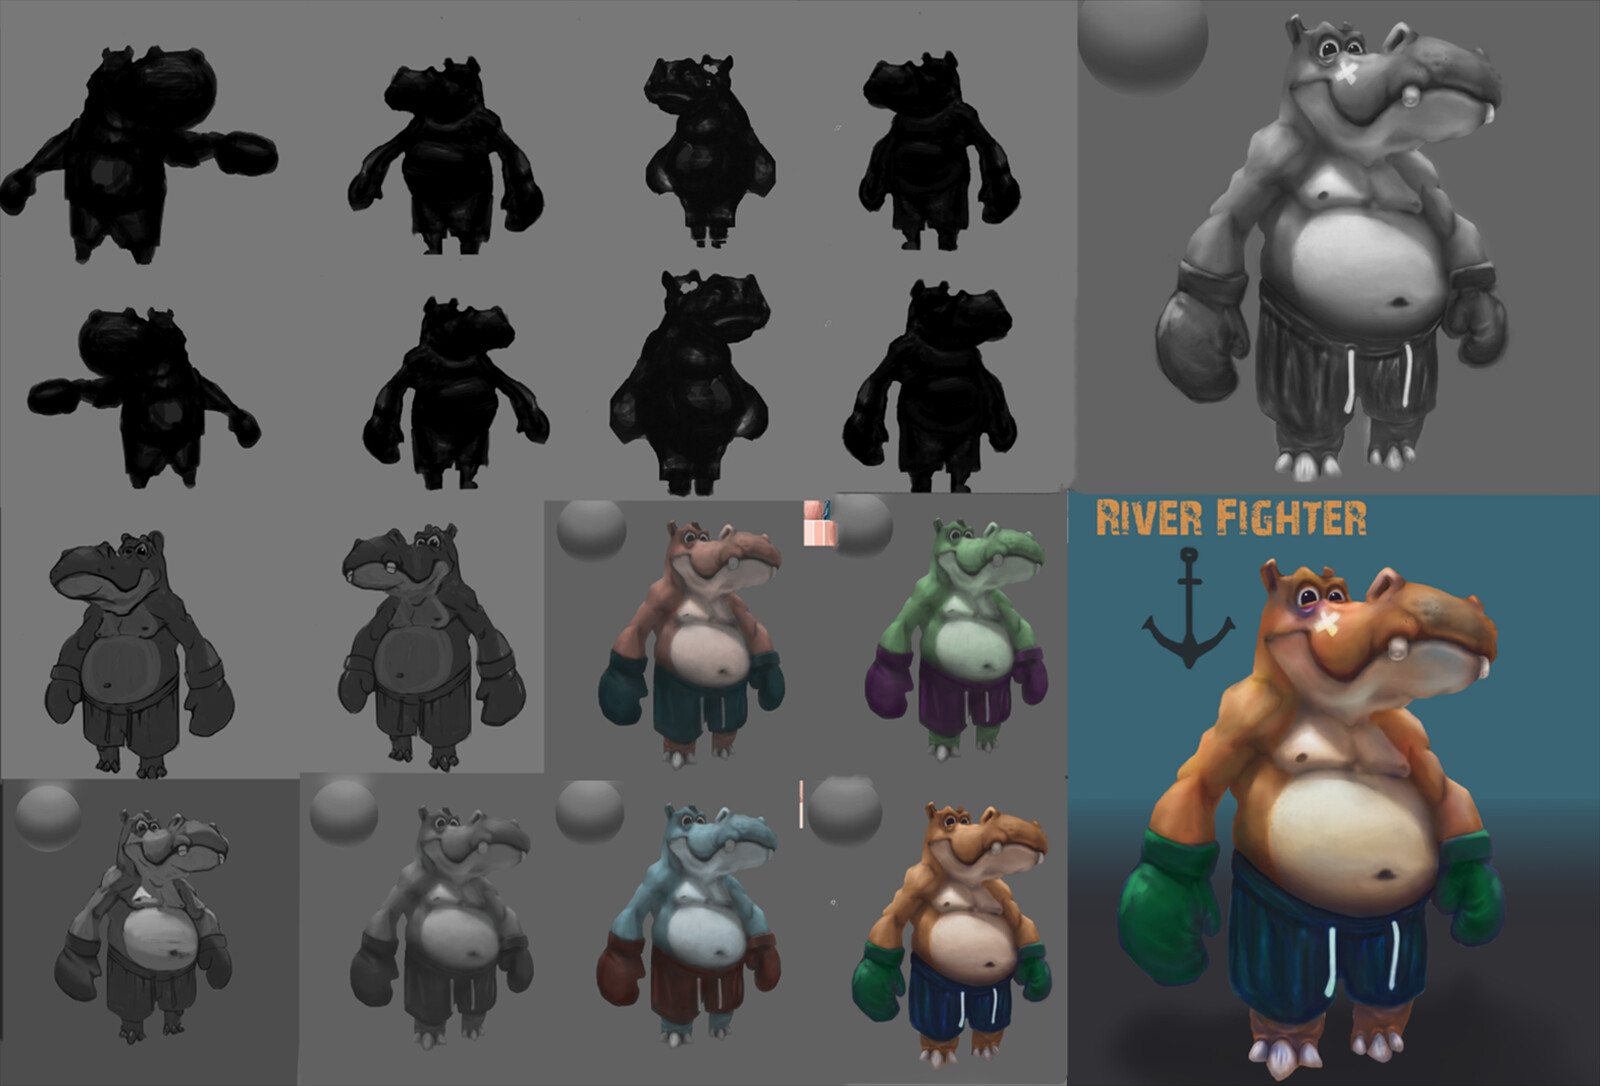 Some of the progress i did from thumbnails to final image.